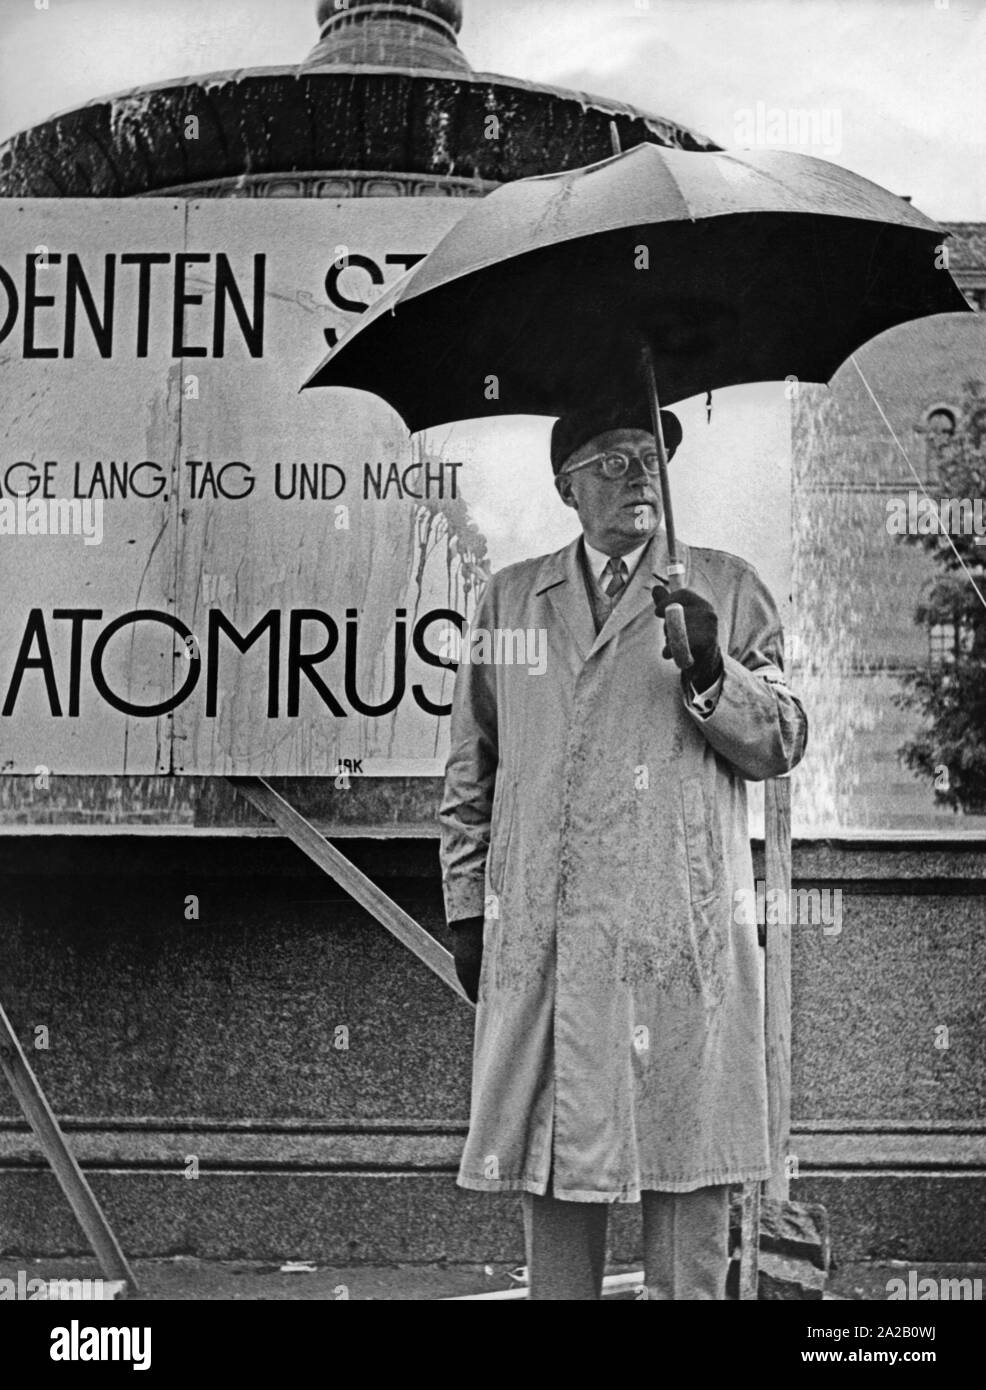 The picture shows the physician and dermatologist Alfred Marchionini at a vigil against nuclear armament in front of the main building of the Ludwig-Maximilians-University in Munich. This picture was taken probably during his time as rector of the university. Stock Photo